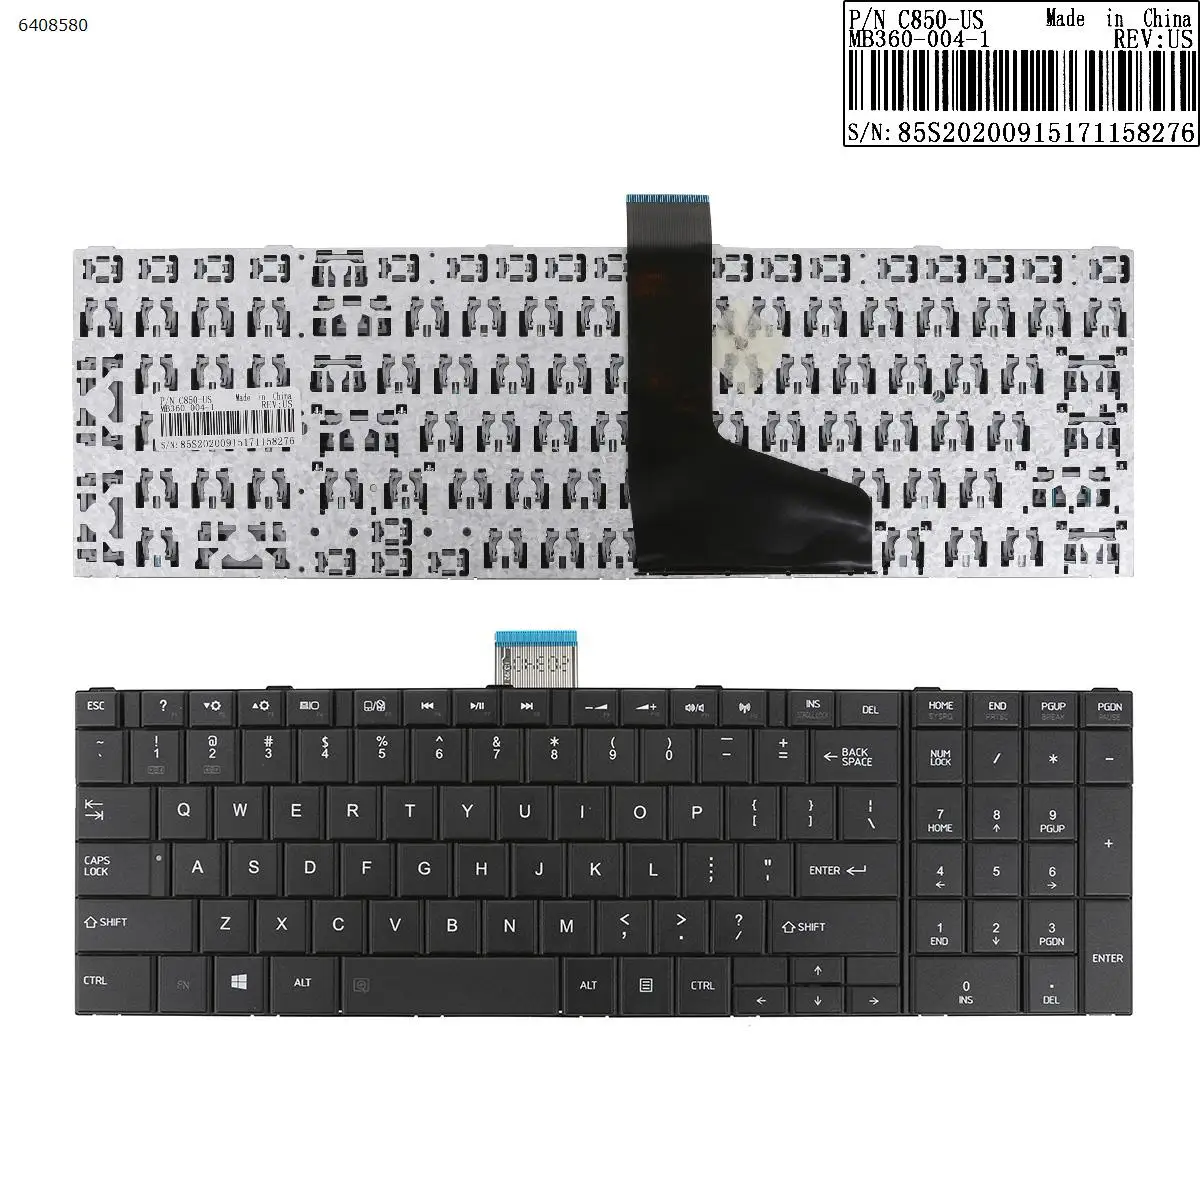 

US New Replacement Keyboard for Toshiba Satellite S850 S850D S855 S855D S870 S870D S875 S875D S950 S955 S950D S955D Laptop Black